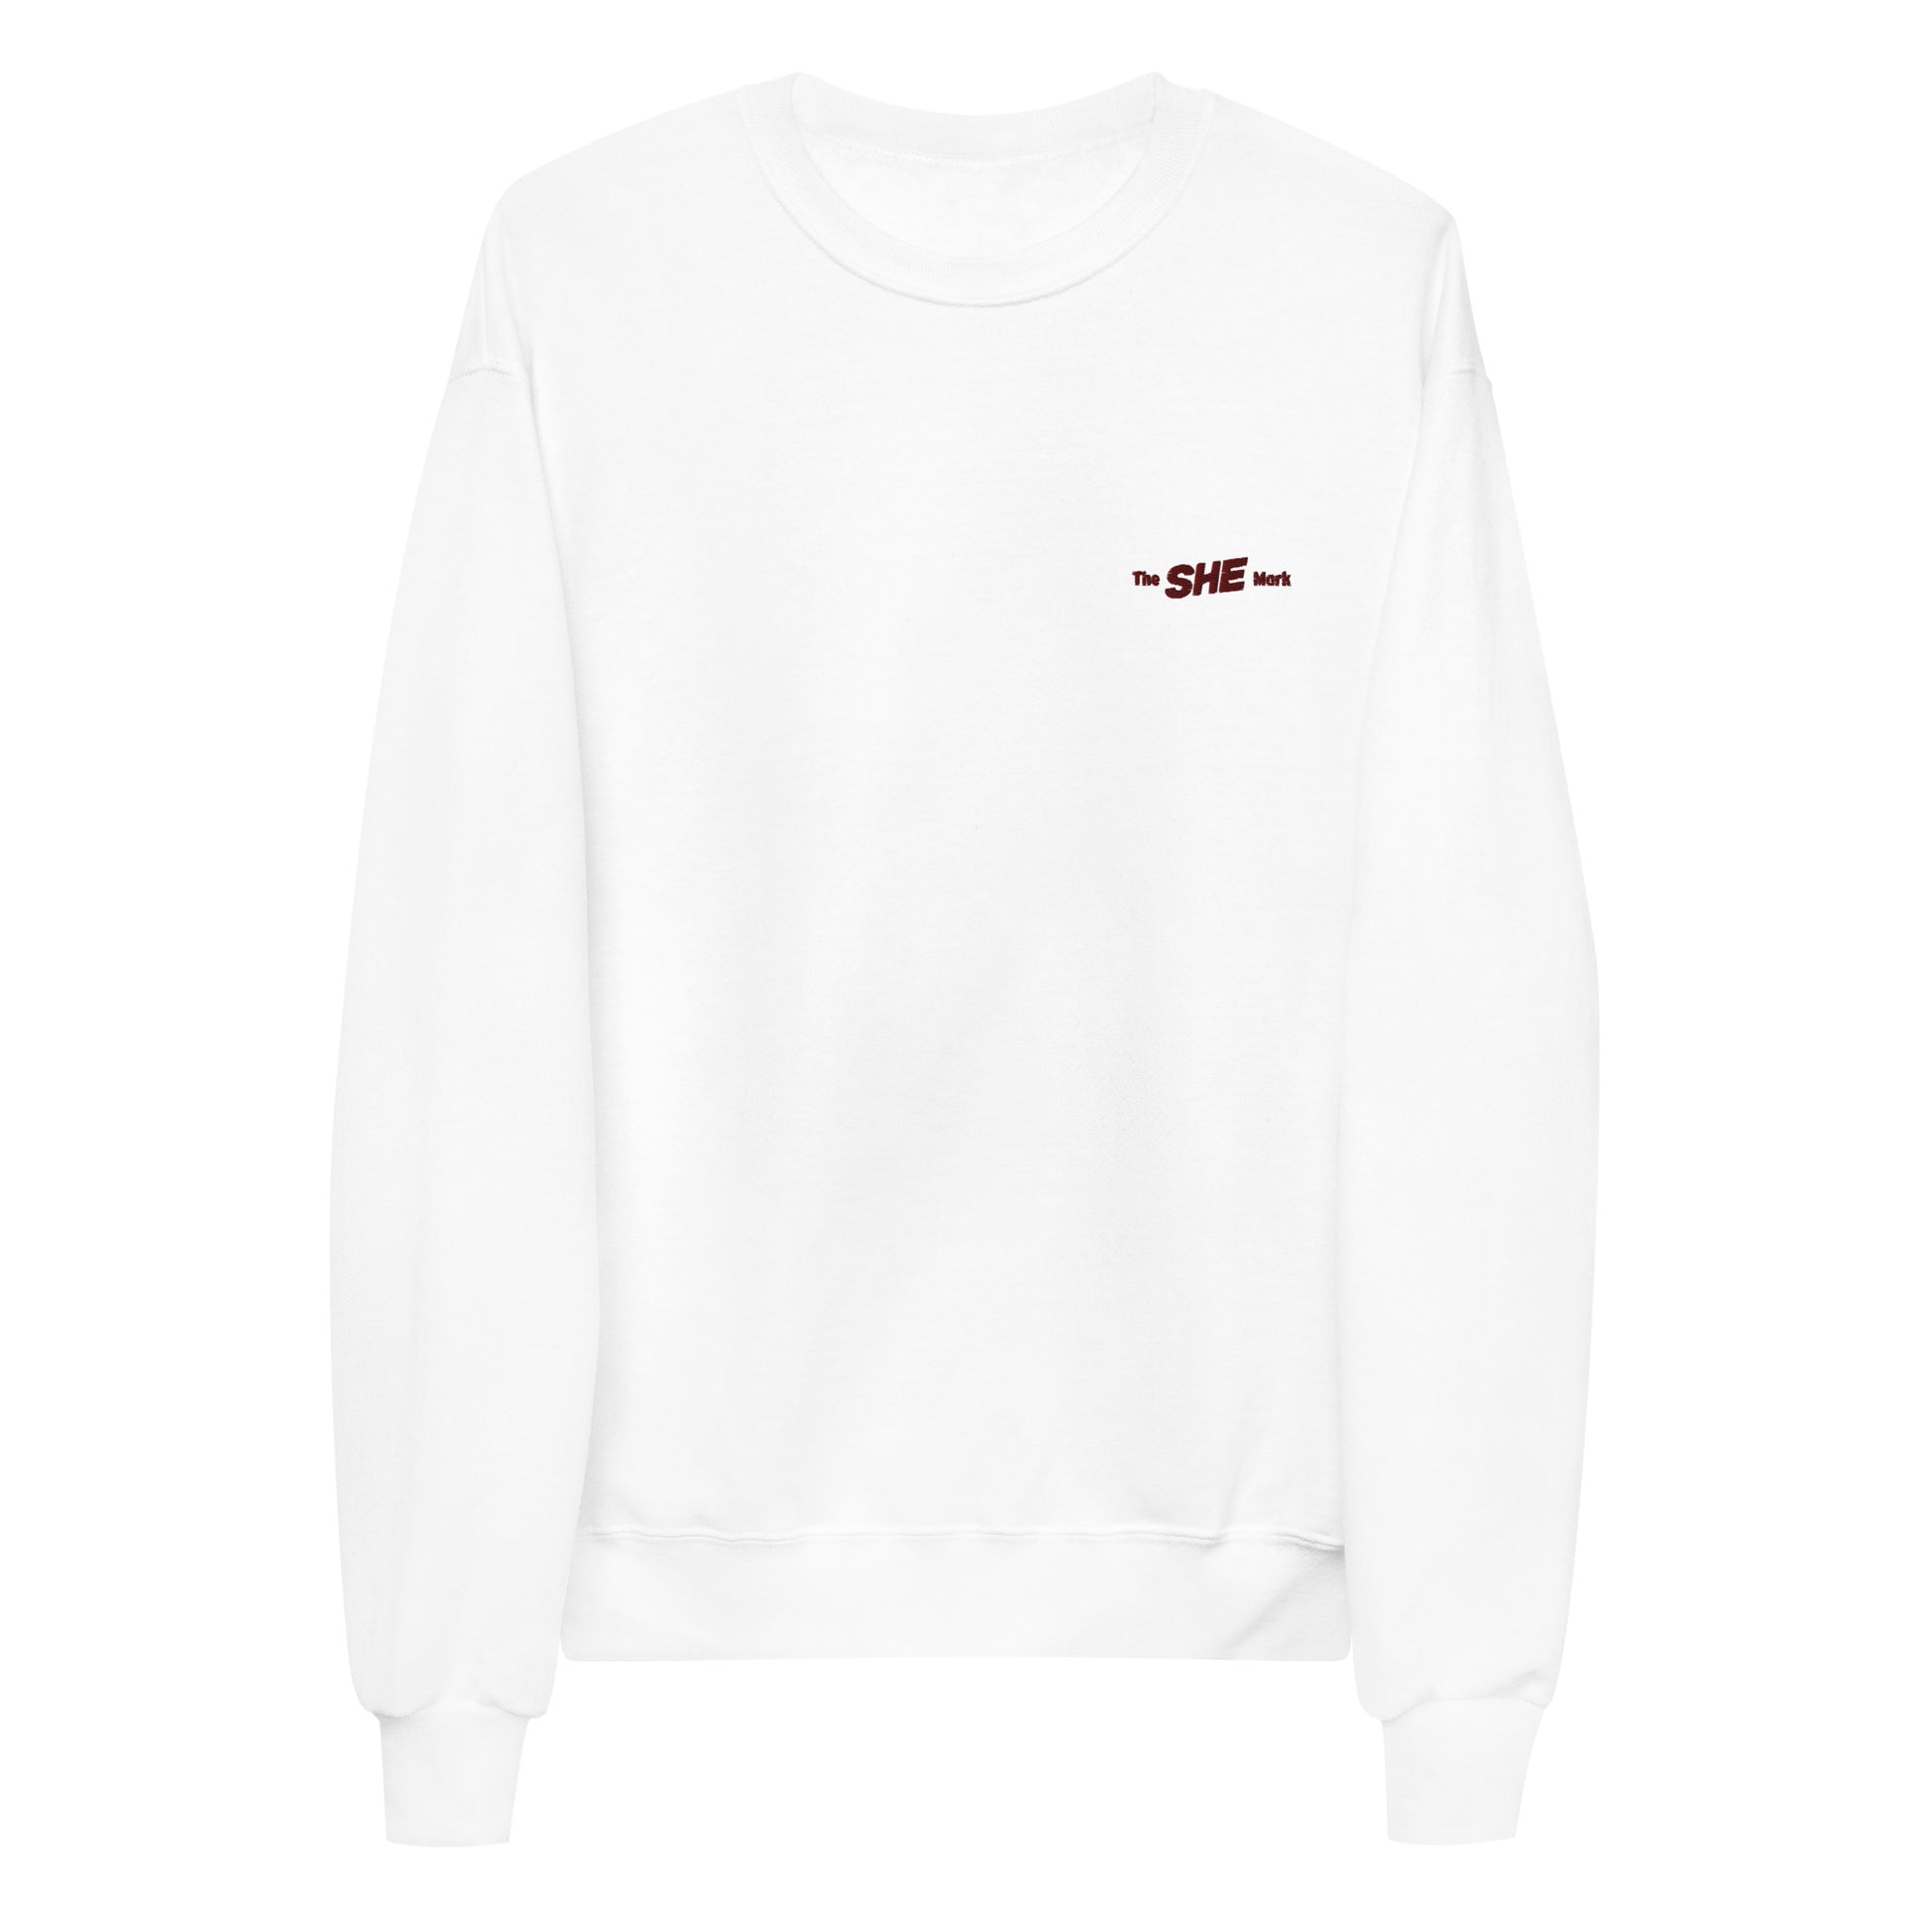 White crewneck sweatshirt with "the SHE Mark" embroidered on the left chest in black.